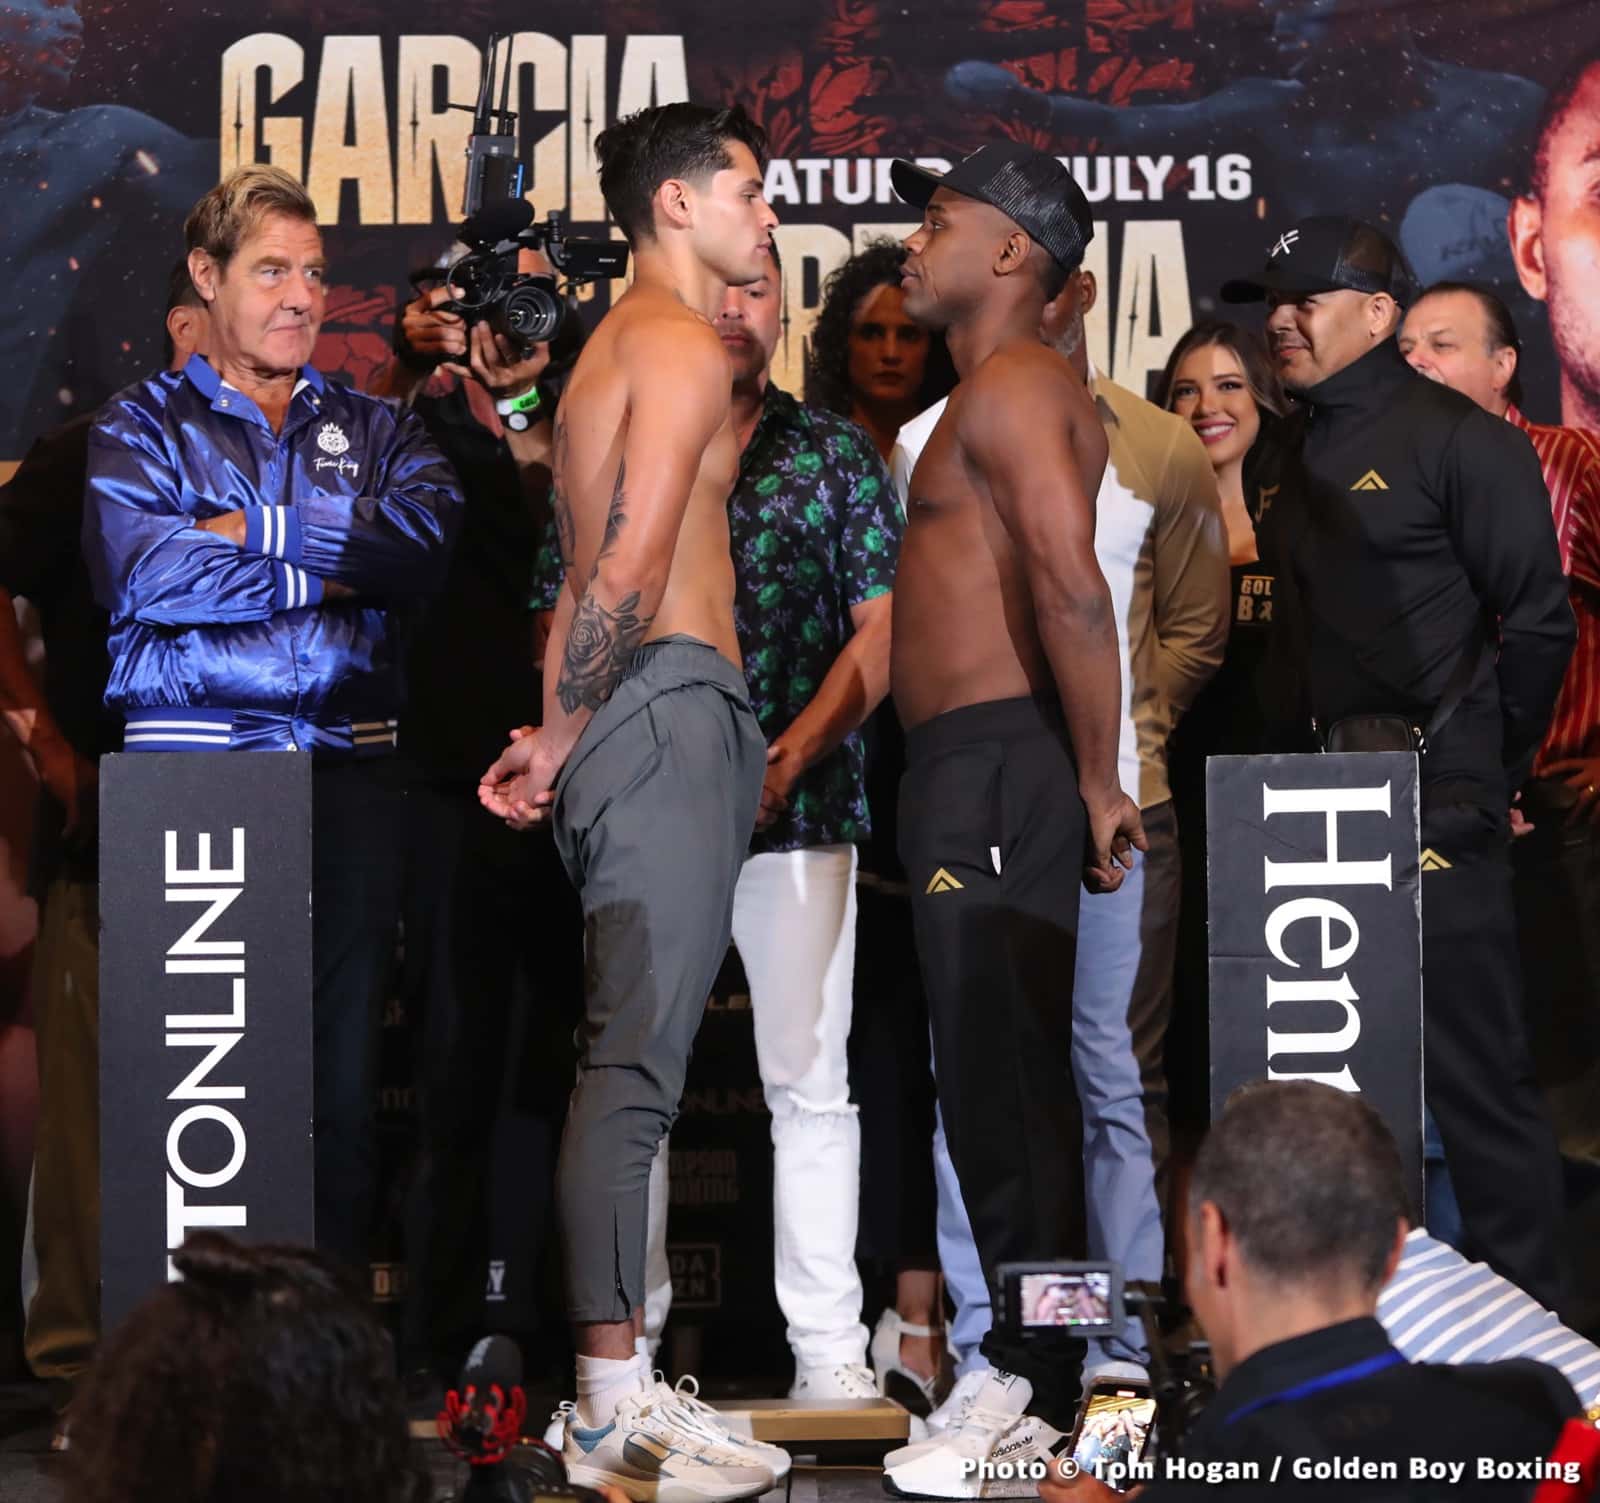 Image: Garcia to focus on boxing Fortuna tonight